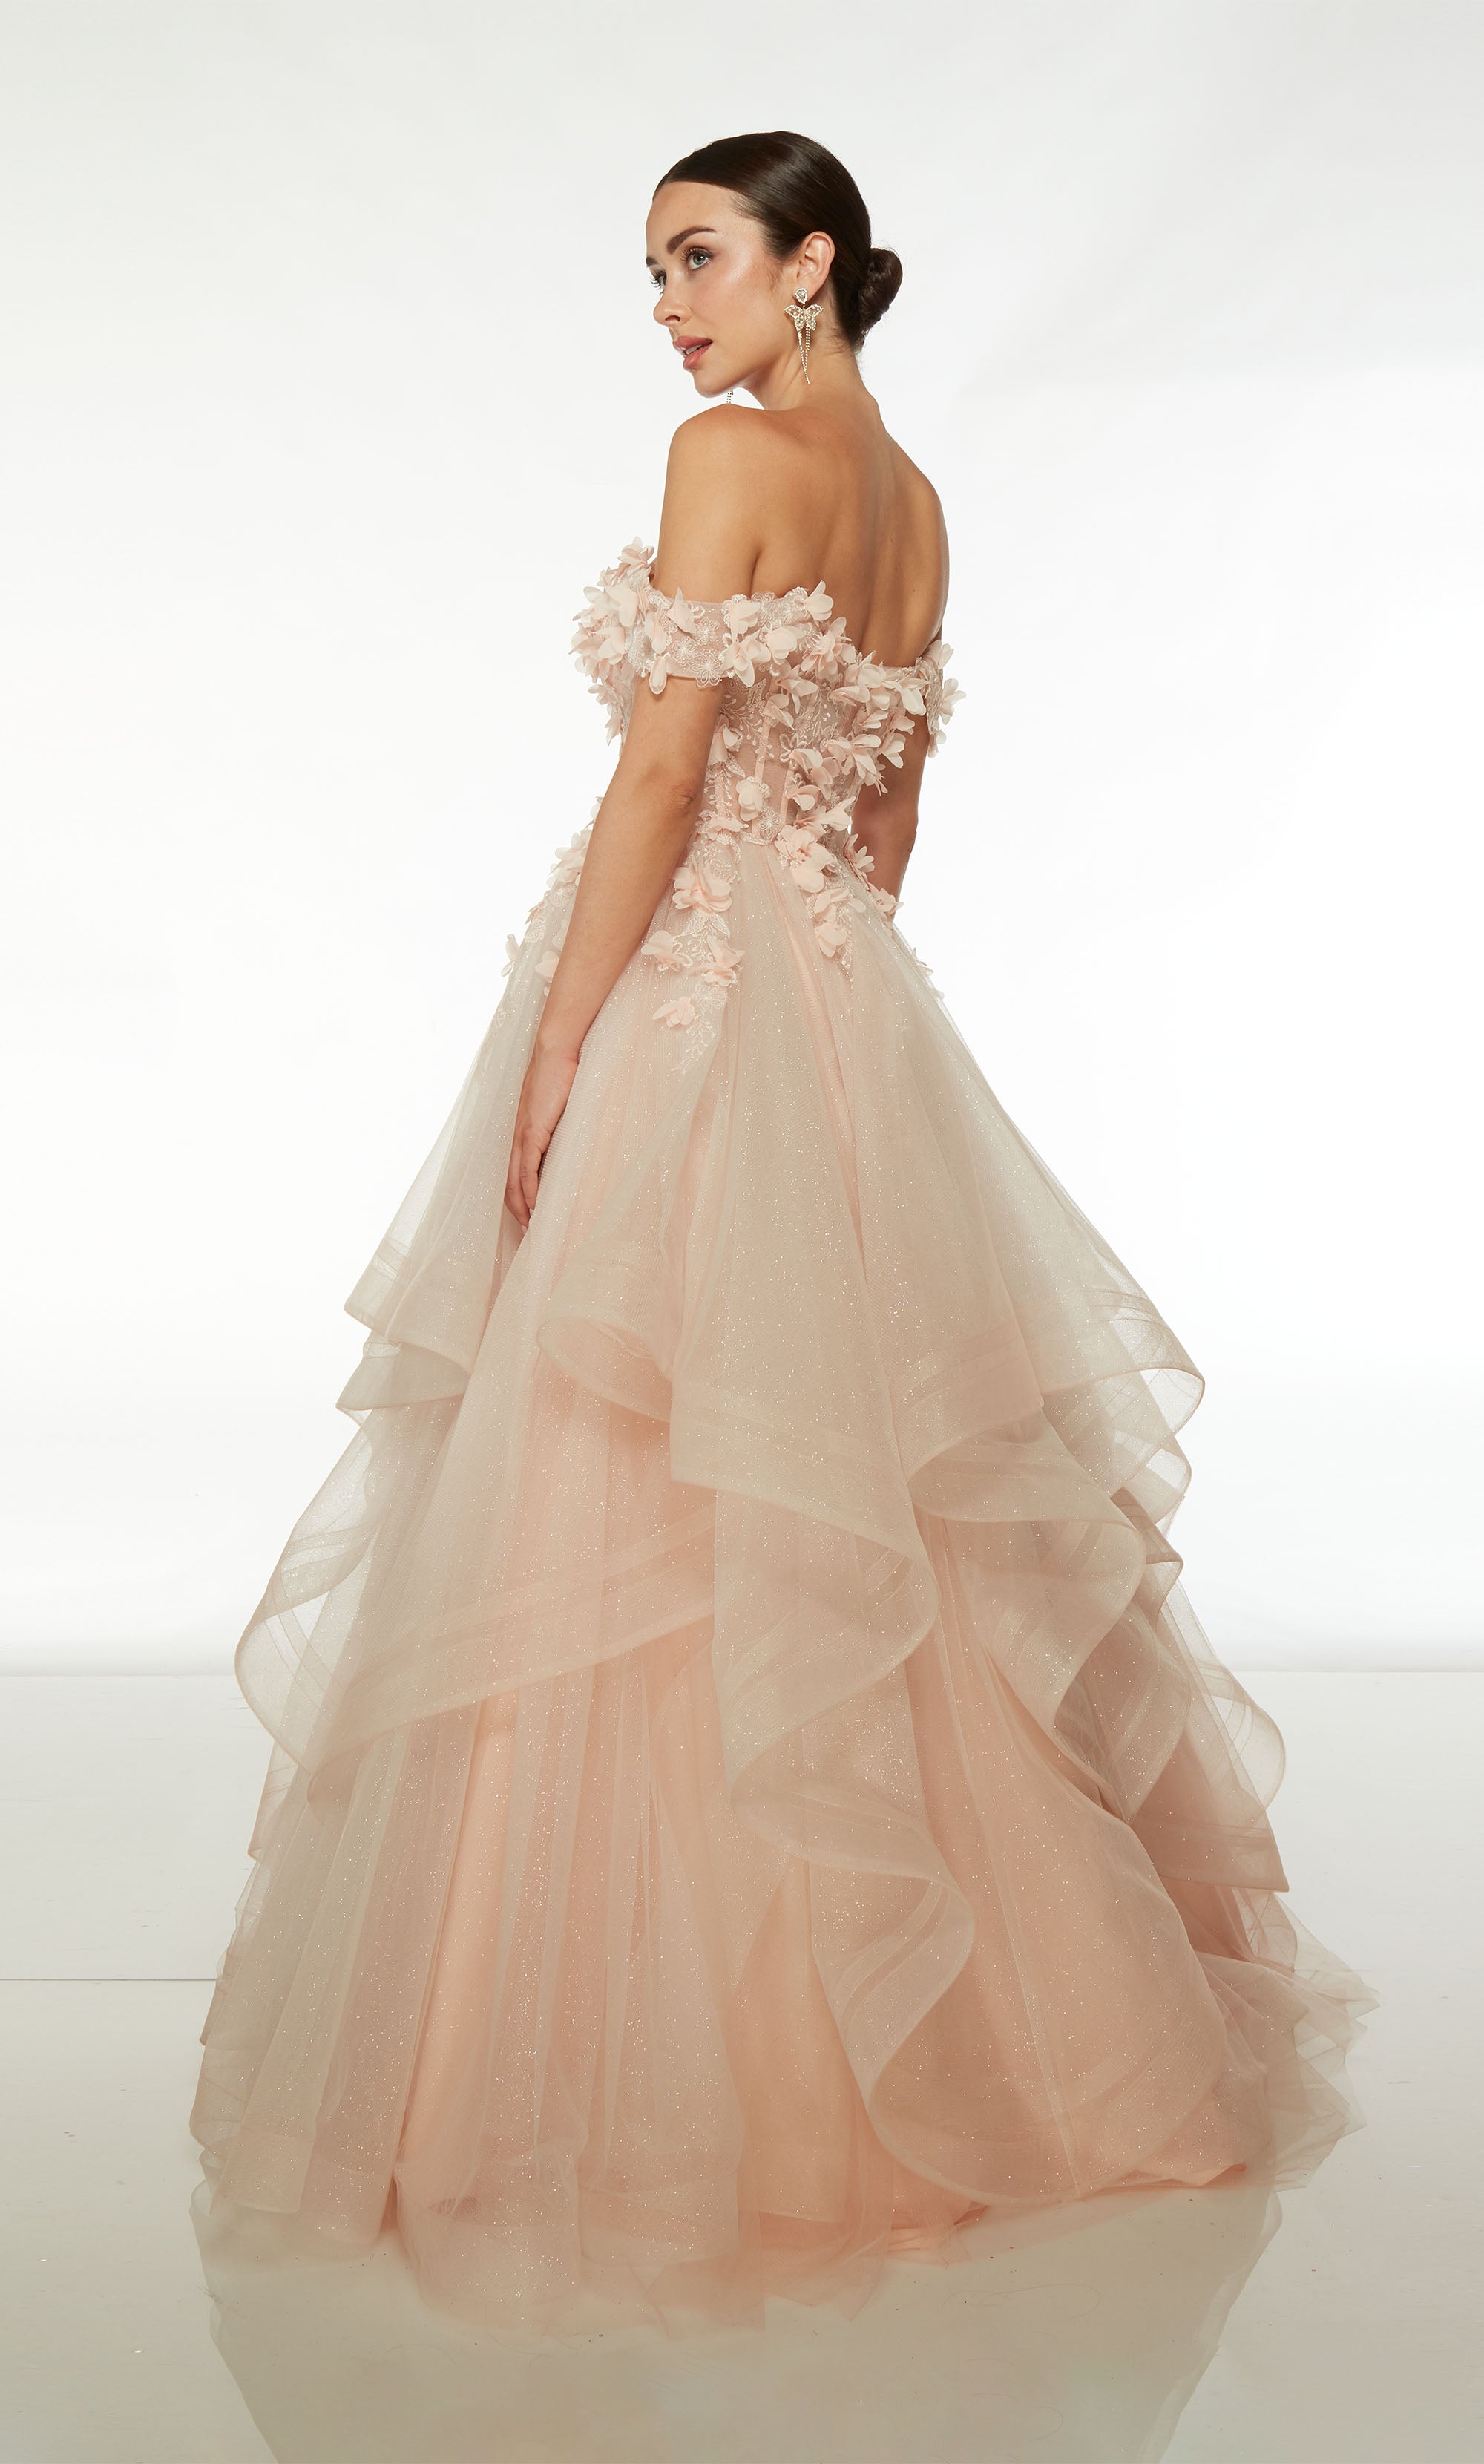 Pink glitter tulle off-the-shoulder corset dress with detachable sleeves, sheer 3D flower embellished bodice, and an ruffled tulle skirt for an whimsical vibe.